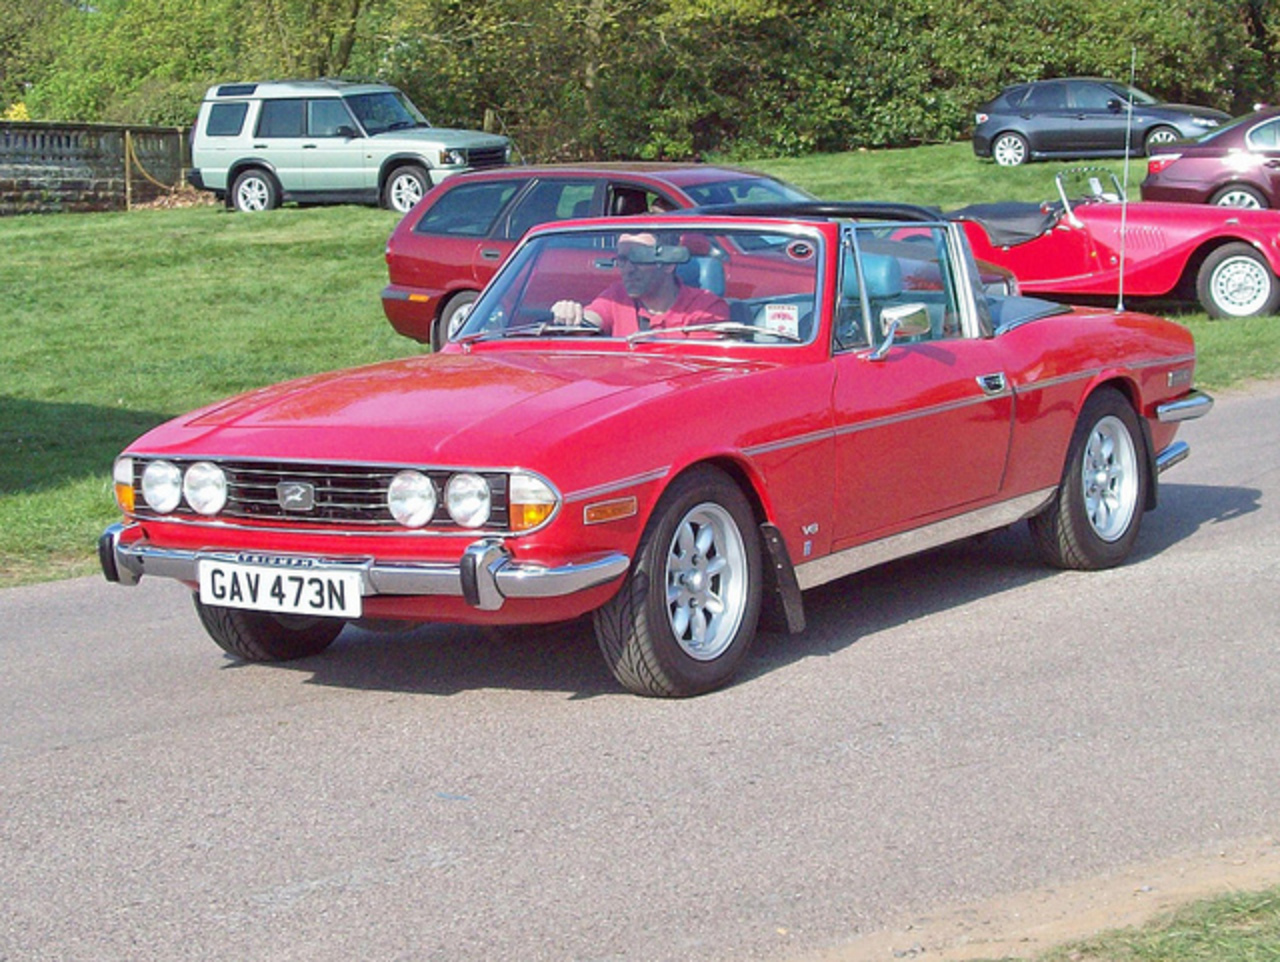 385 Triumph Stag (1974) | Flickr - Photo Sharing!